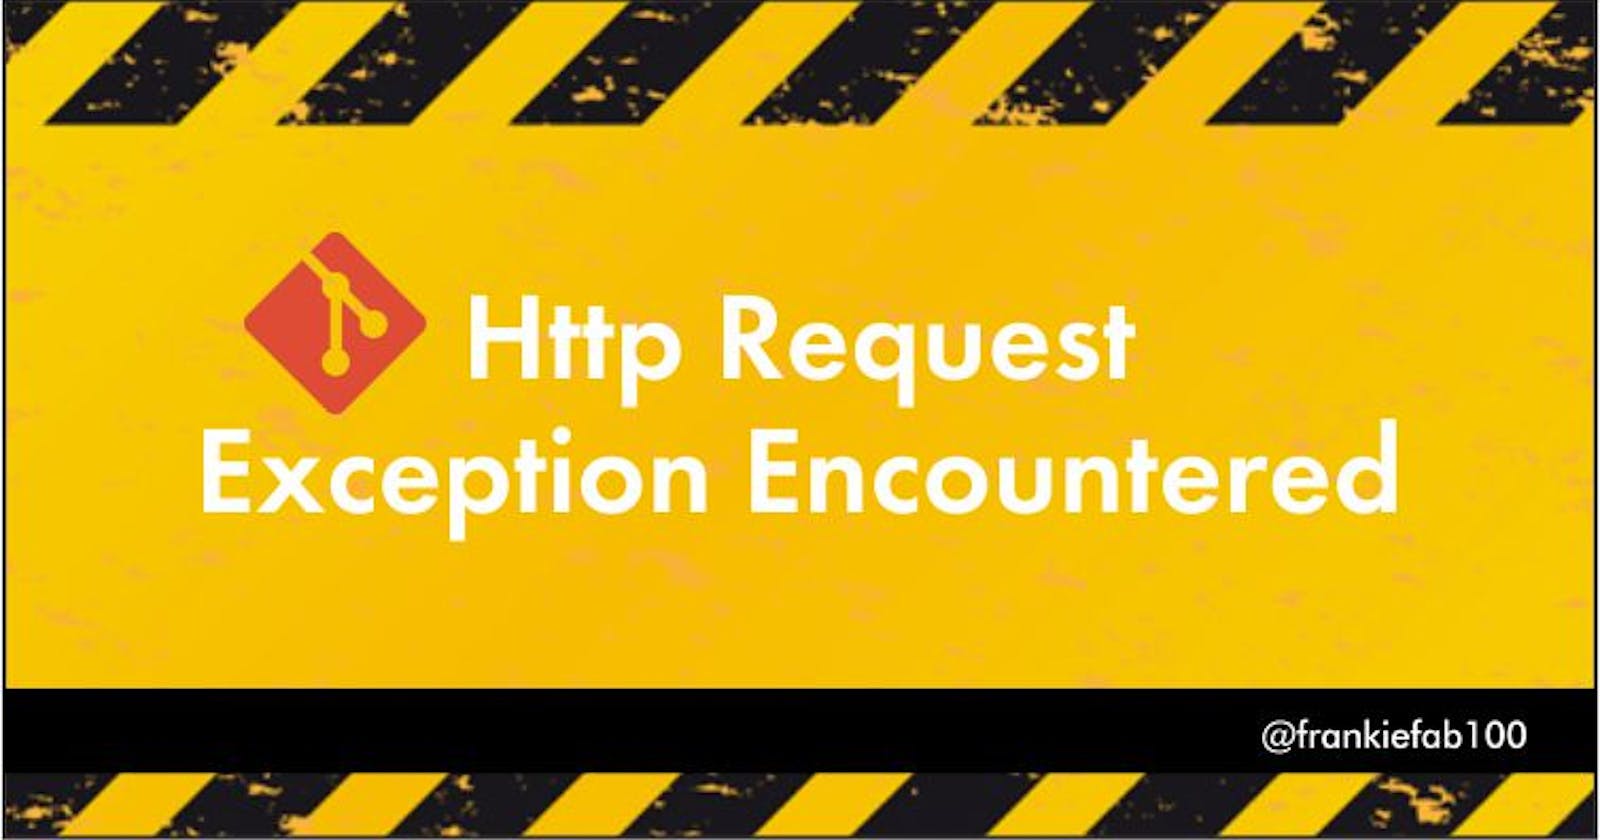 Http Request Exception Encountered [SOLVED]